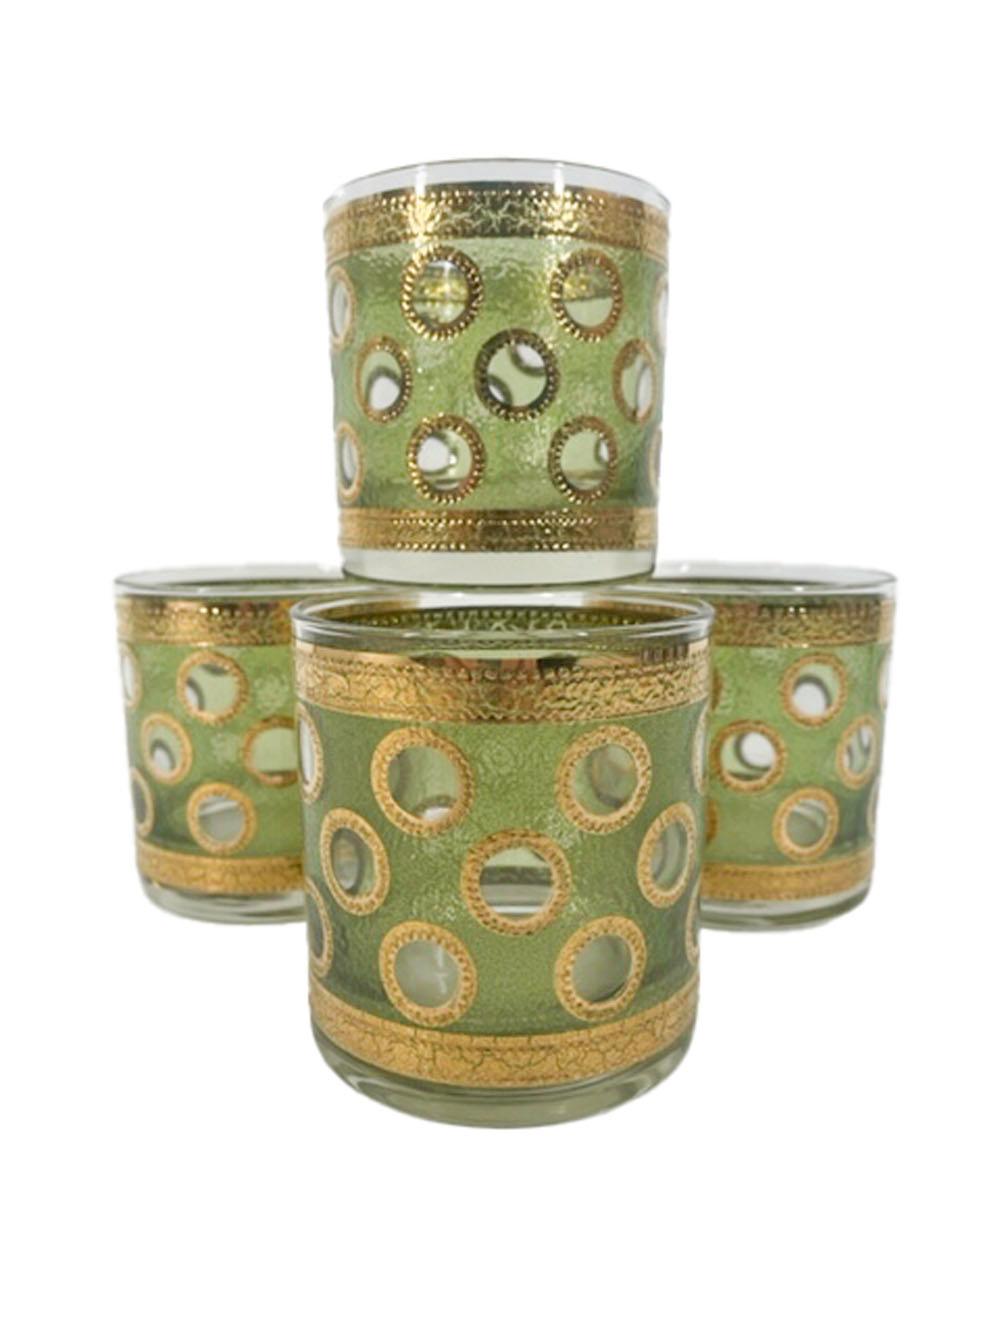 American Mid-Century Modern Rocks Glasses with Translucent Green Enamel and 22k Gold